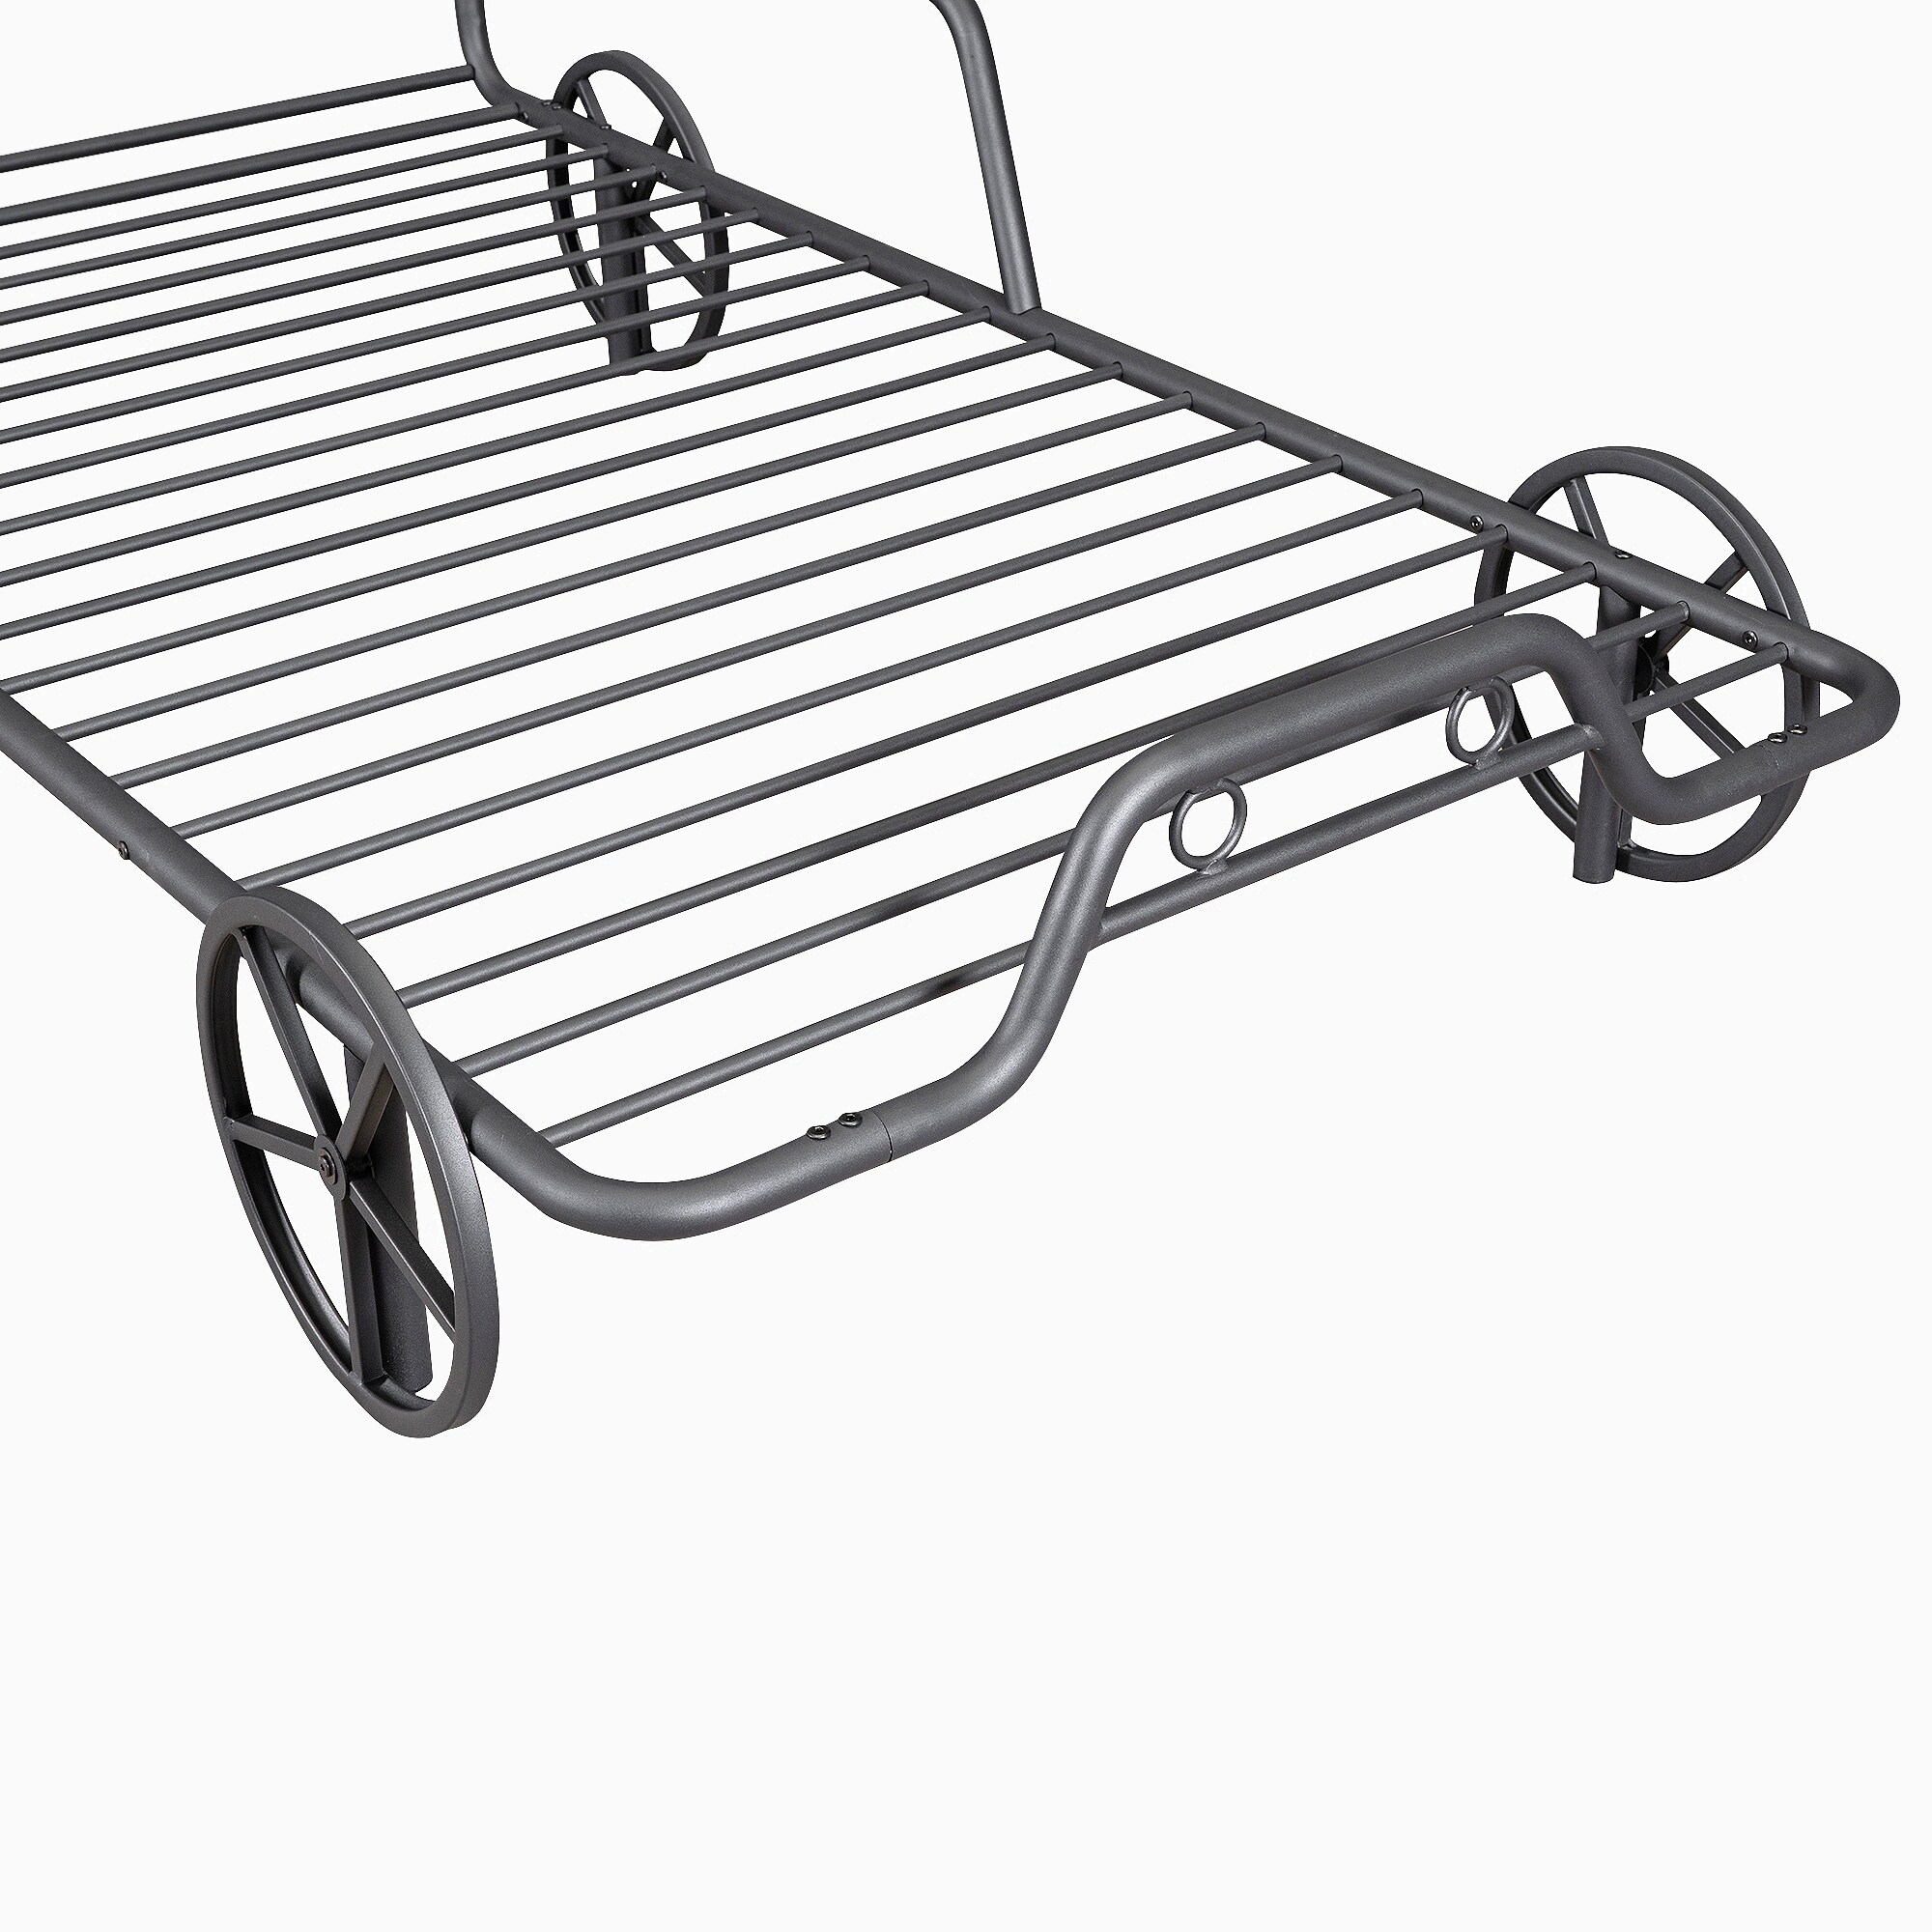 Twin Size Metal Car Bed with Four Wheels, Guardrails and X-Shaped Frame Shelf - Black